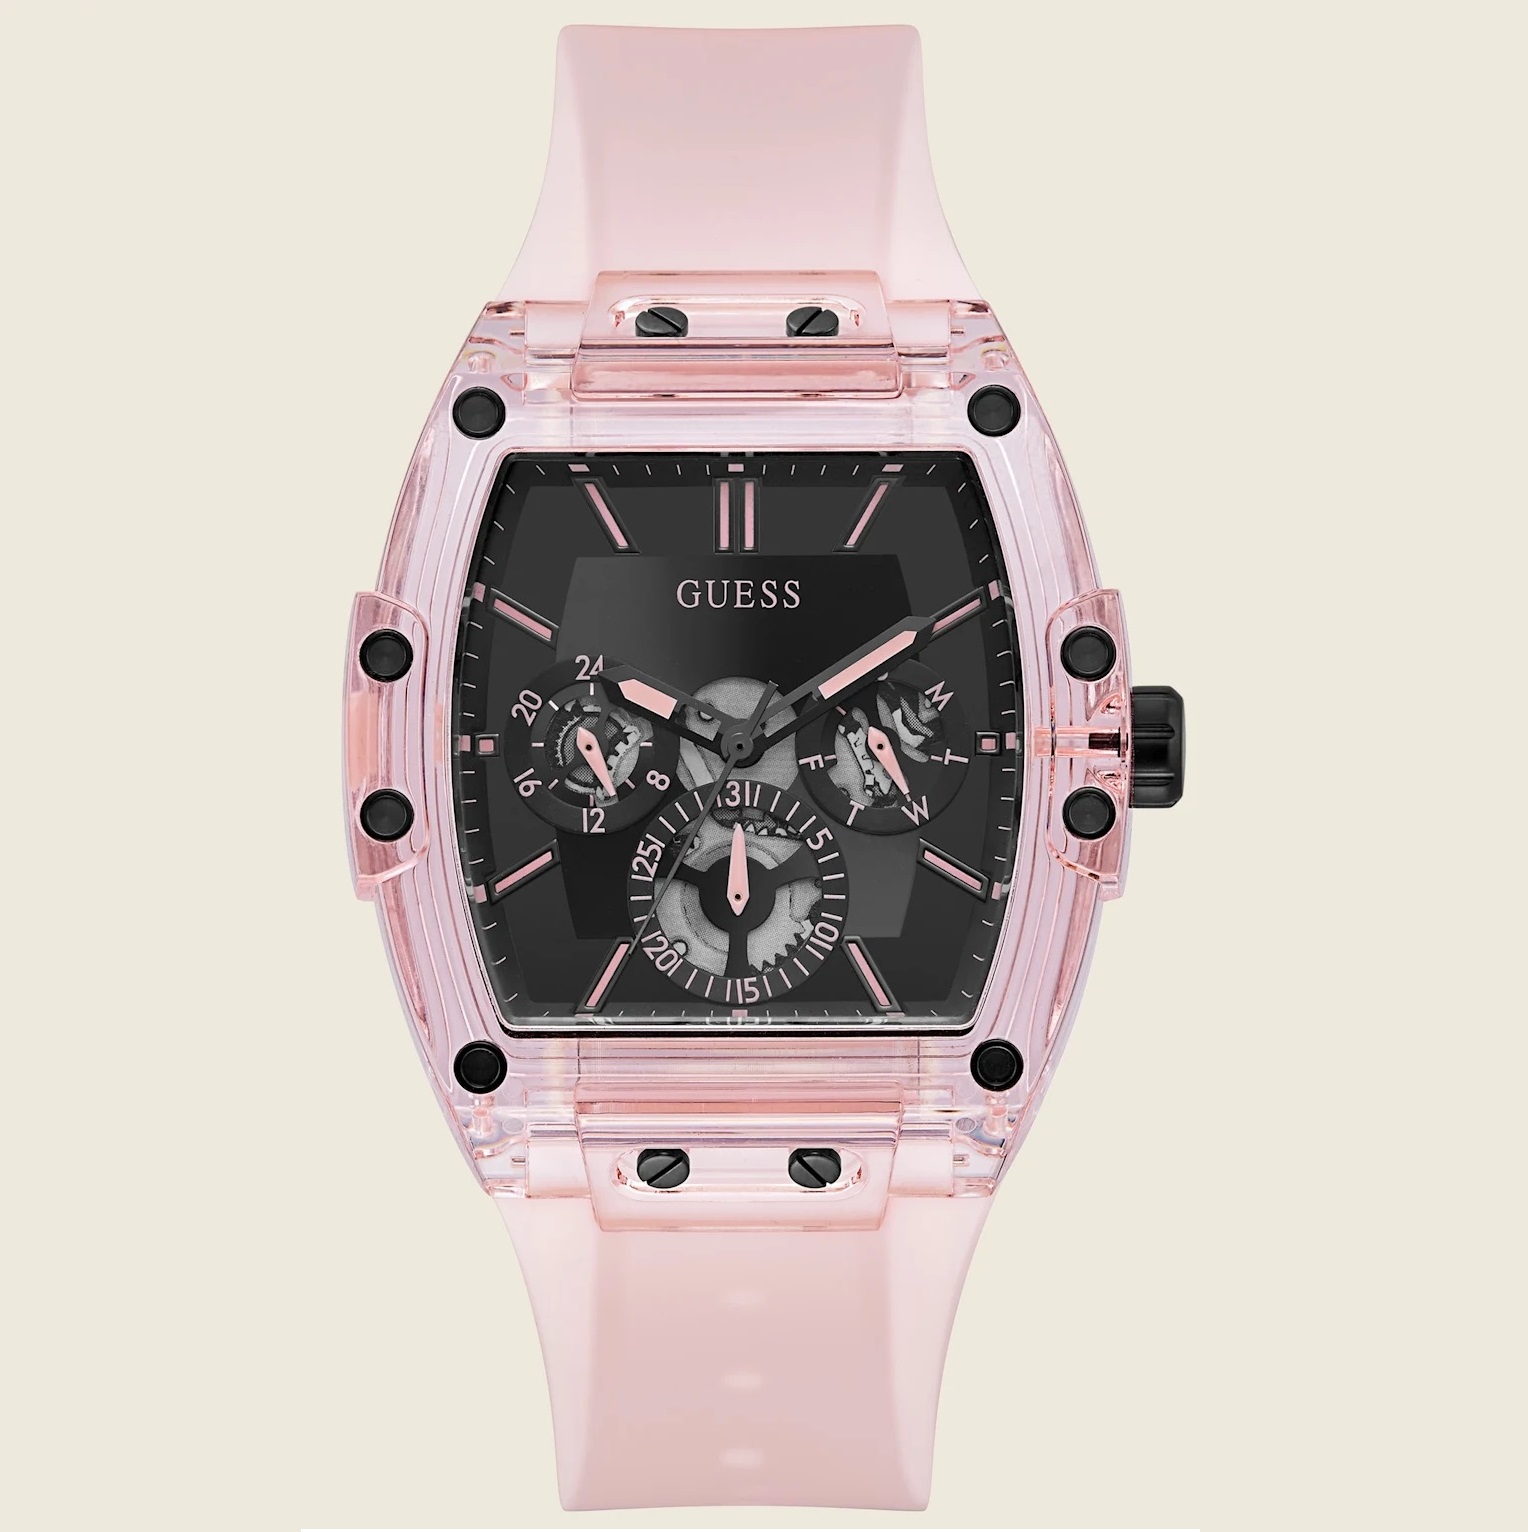 ĐỒNG HỒ GUESS PINK MULTIFUNCTION WATCH 3